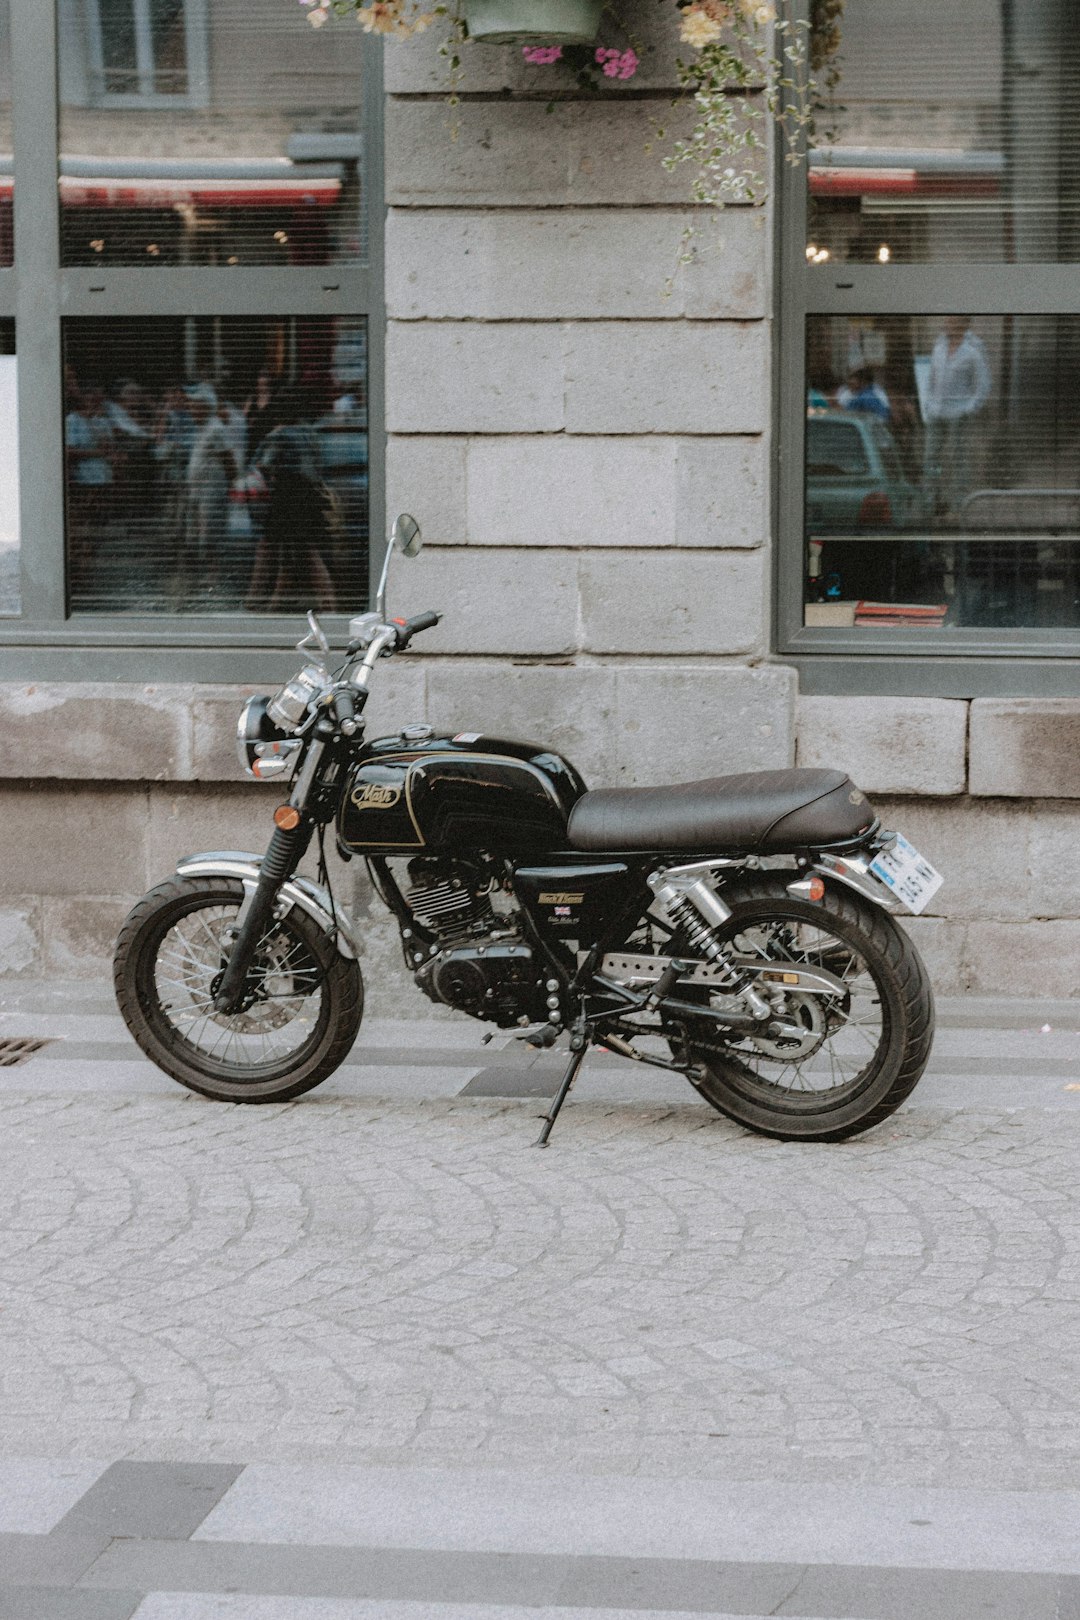 black and silver standard motorcycle parked beside brown brick wall